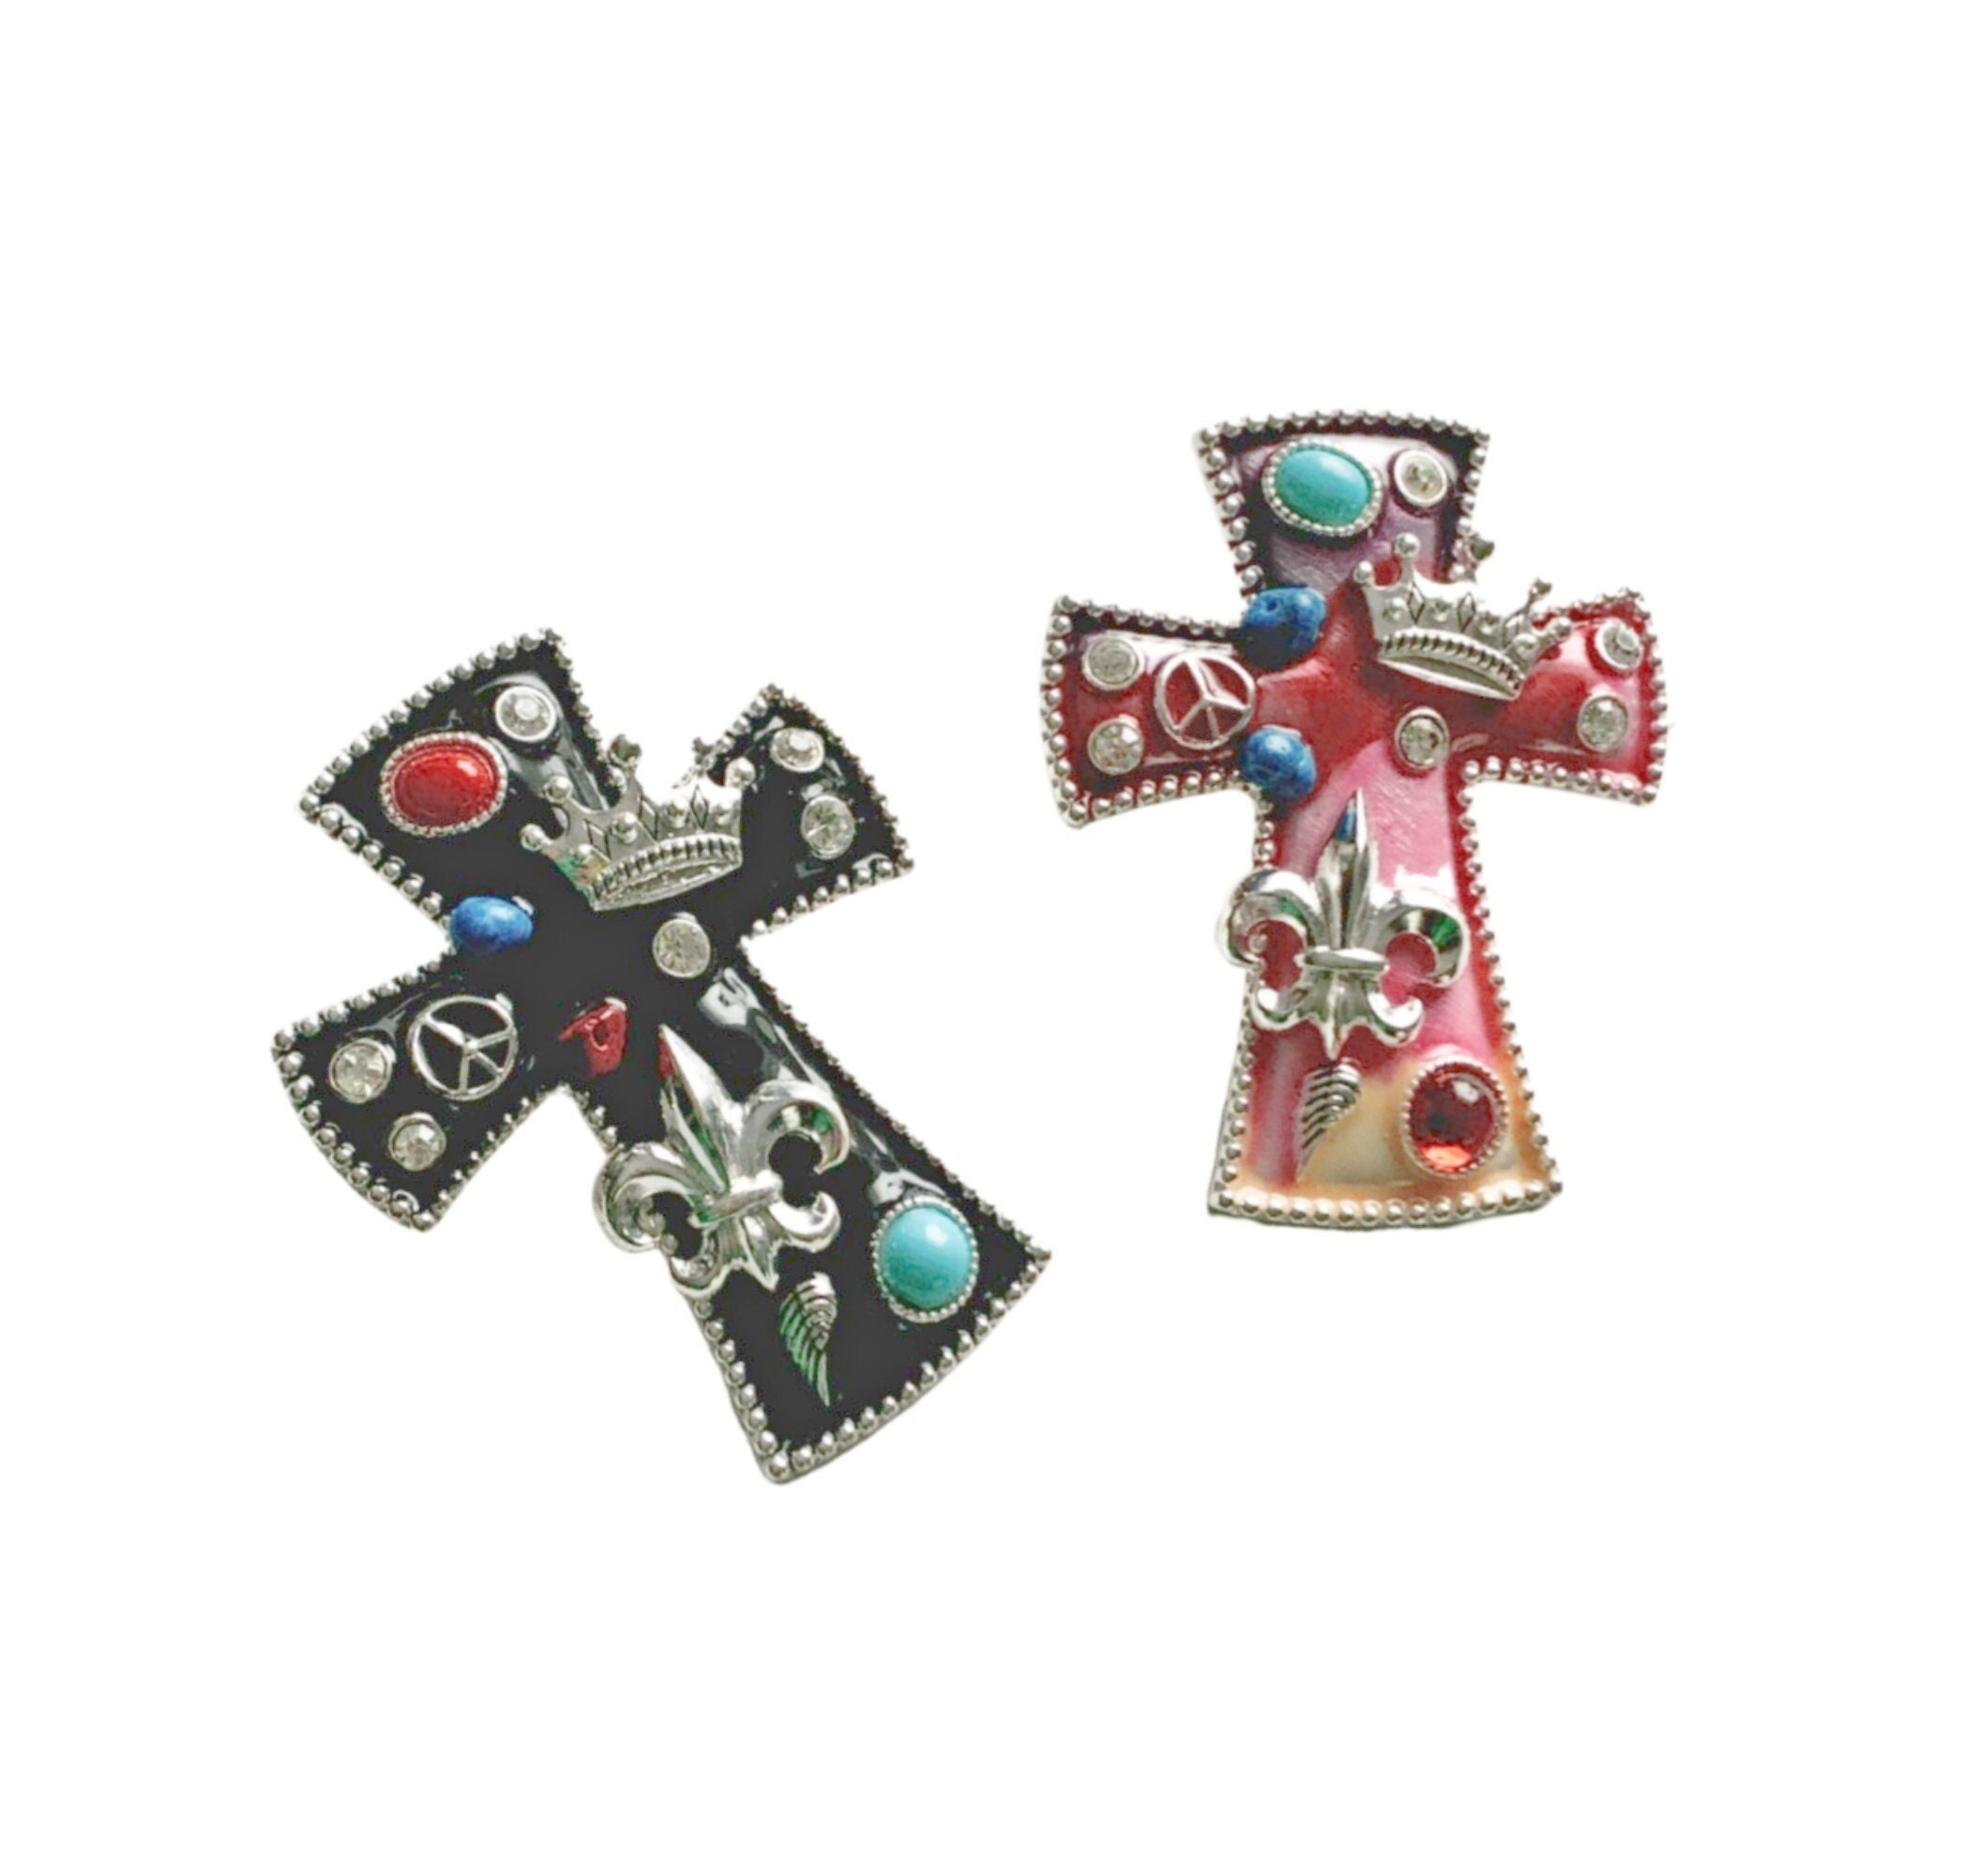 Small Pink Enamel Crucifix or Pendant Purchase 1, Set of Two or